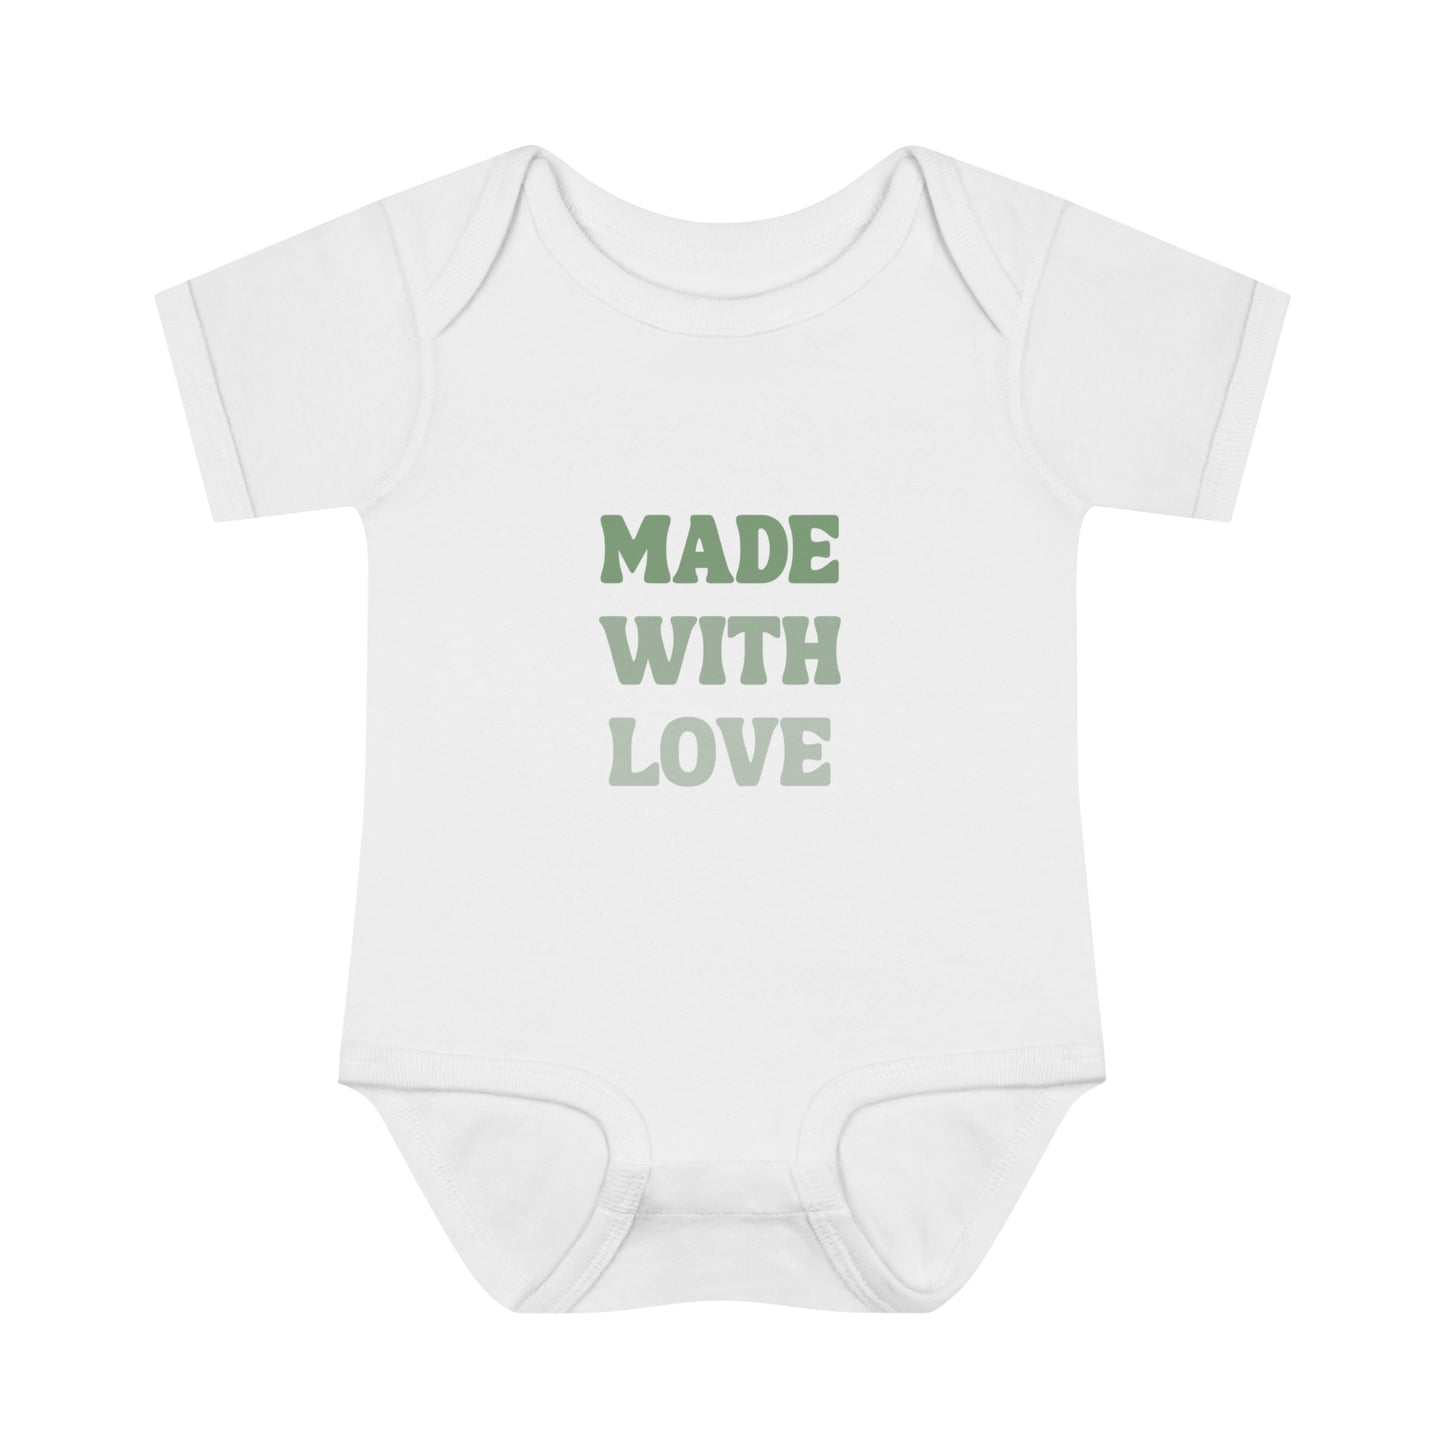 Made with love Baby Bodysuit